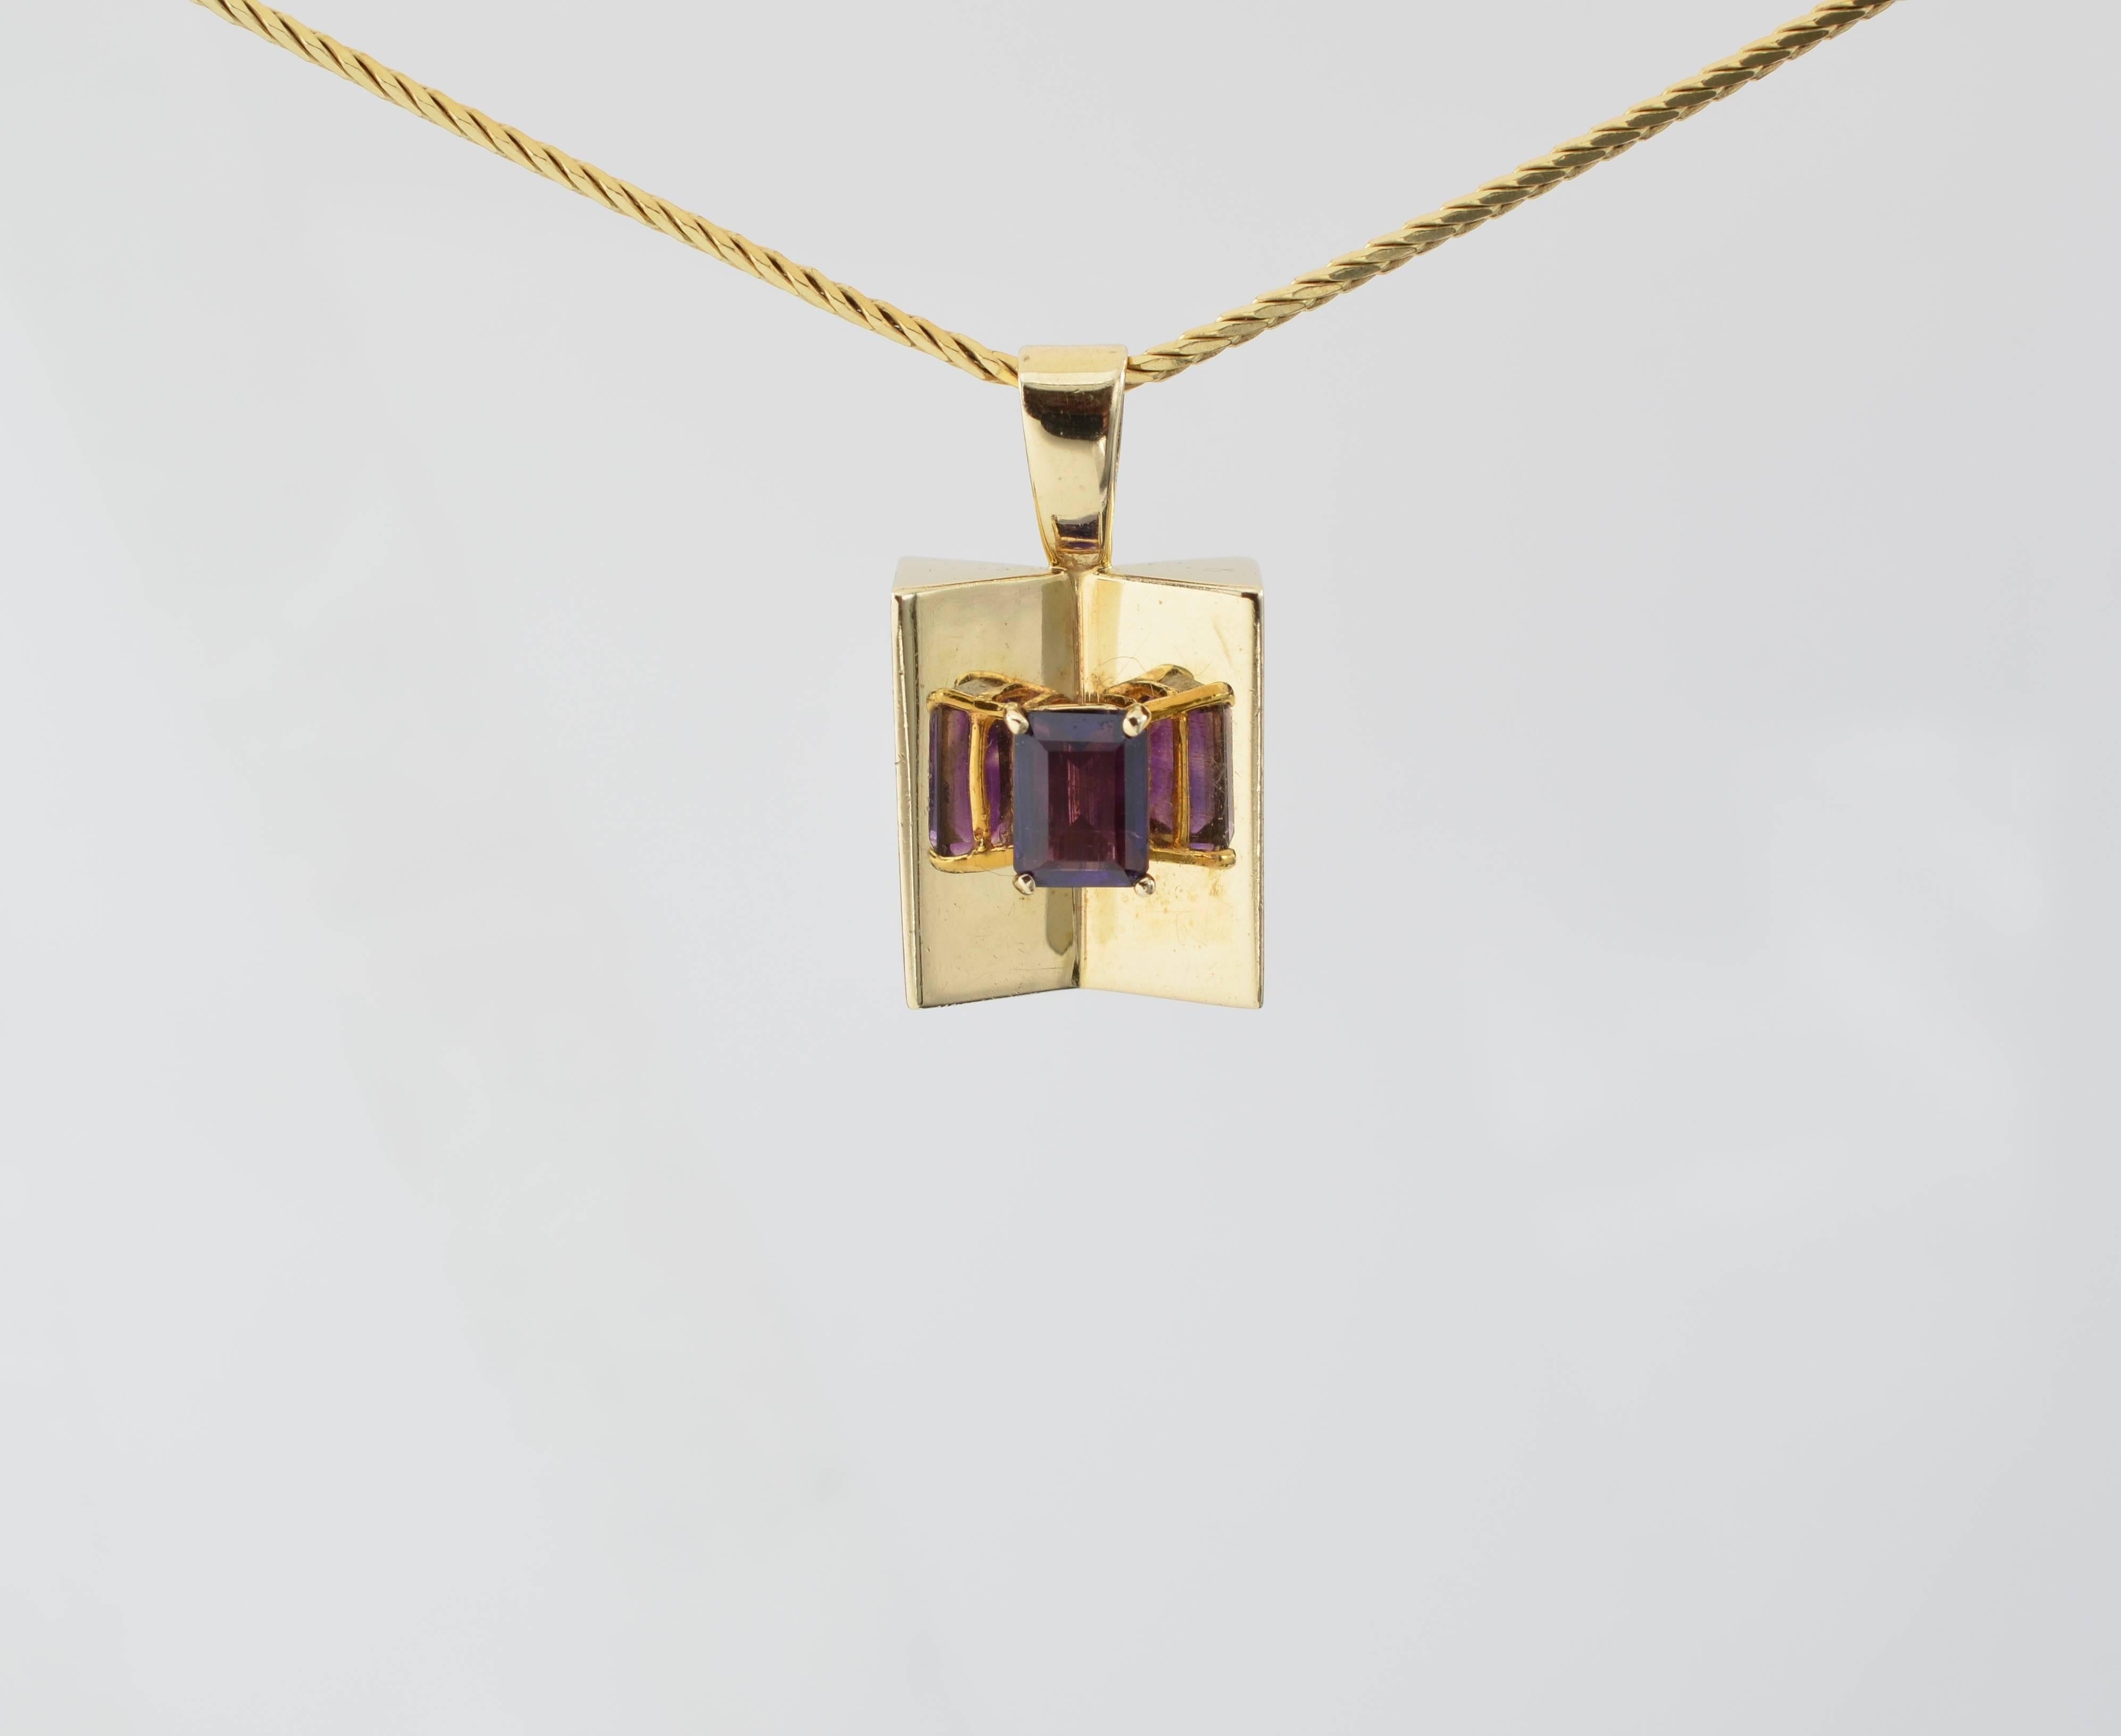 1970's vintage amethyst mirror pendant. Three reflections of the center stone create an optical illusion of added dimensions. Very popular in the 1970's. A substantial piece of 14K yellow gold with an 18.5 inch chain. 